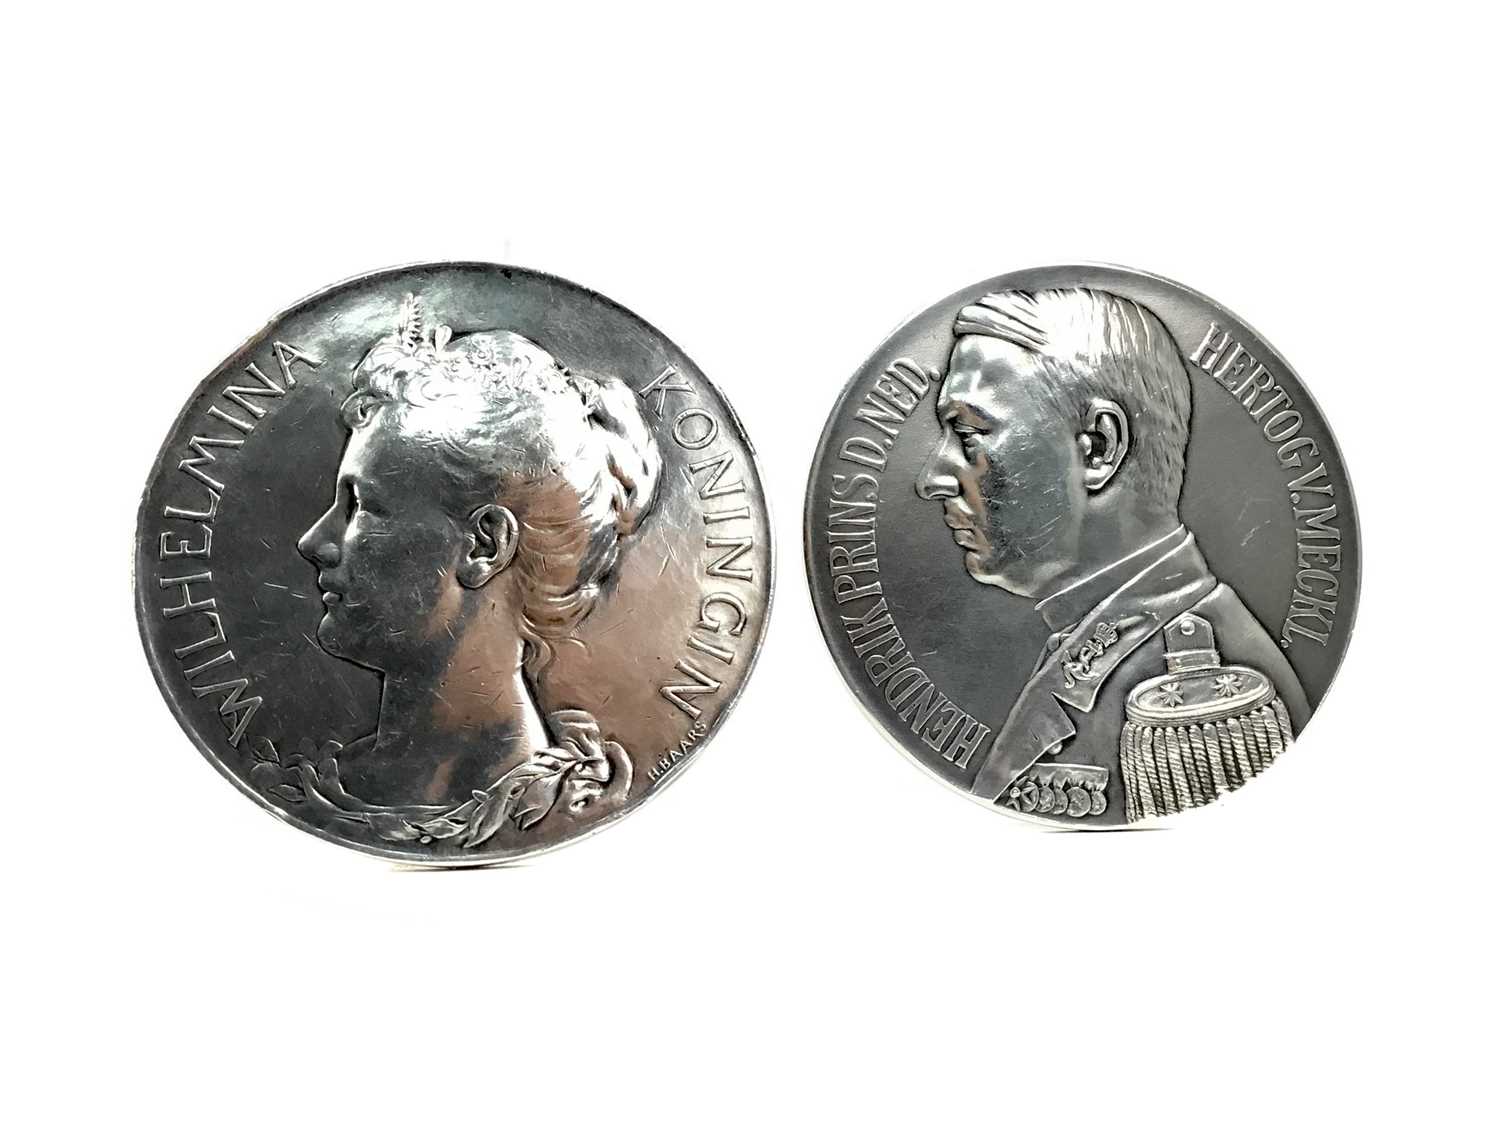 Lot 1323 - A PAIR OF MEDALS DEPICTING QUEEN WILHELMINA AND PRINCE HENDRIK OF THE NETHERLANDS